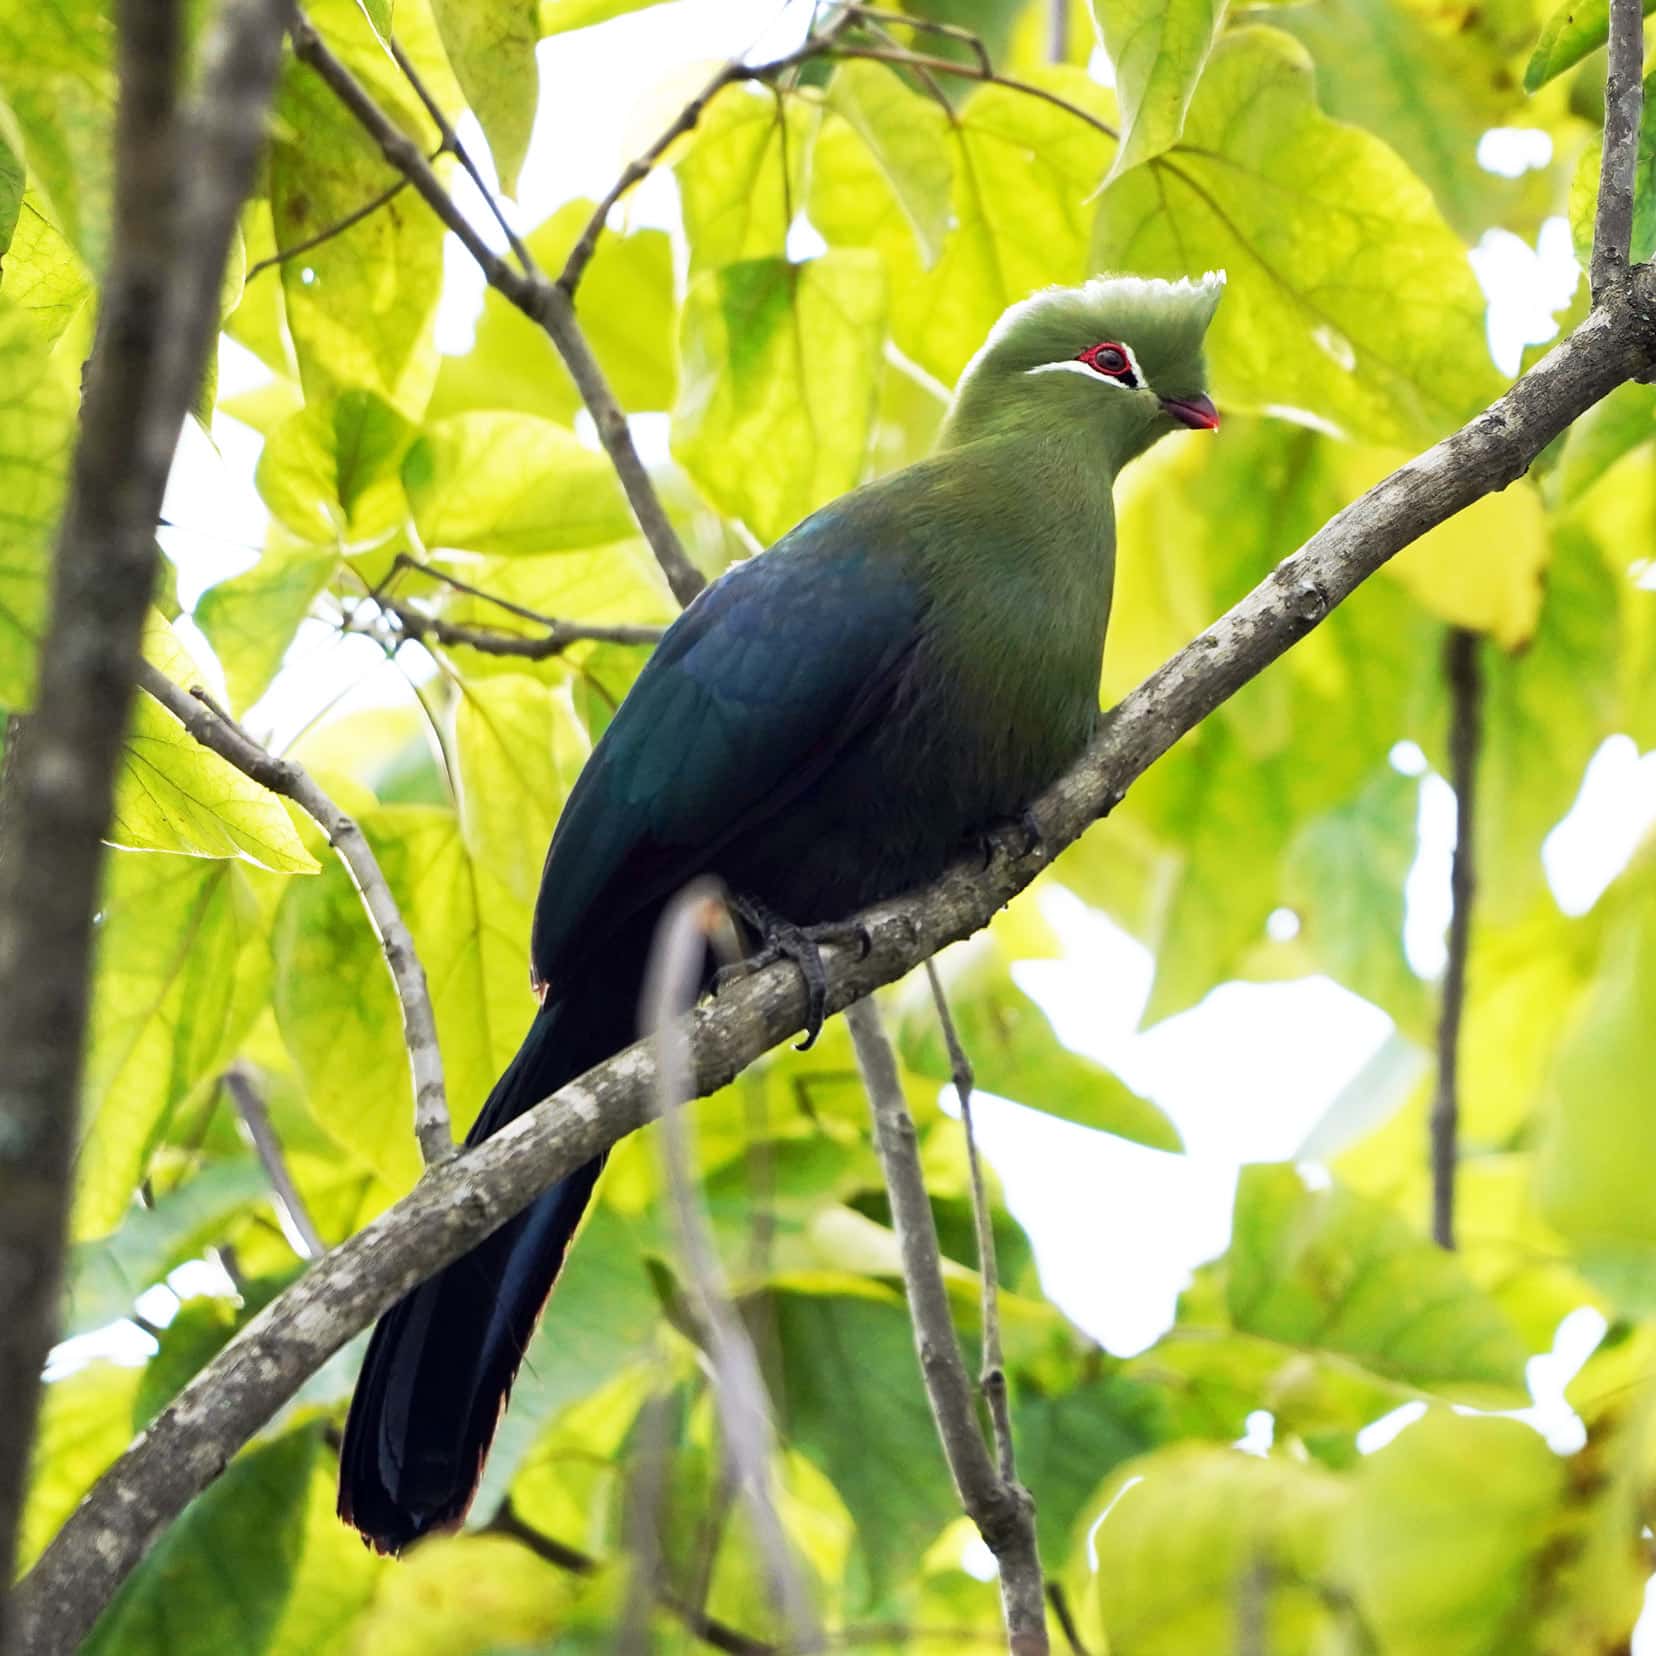 the Knysna Turaco - a green and blue bird with a white stripes. either side of eye and white tips in its crest, sat on. abranch amongst bright green leaves